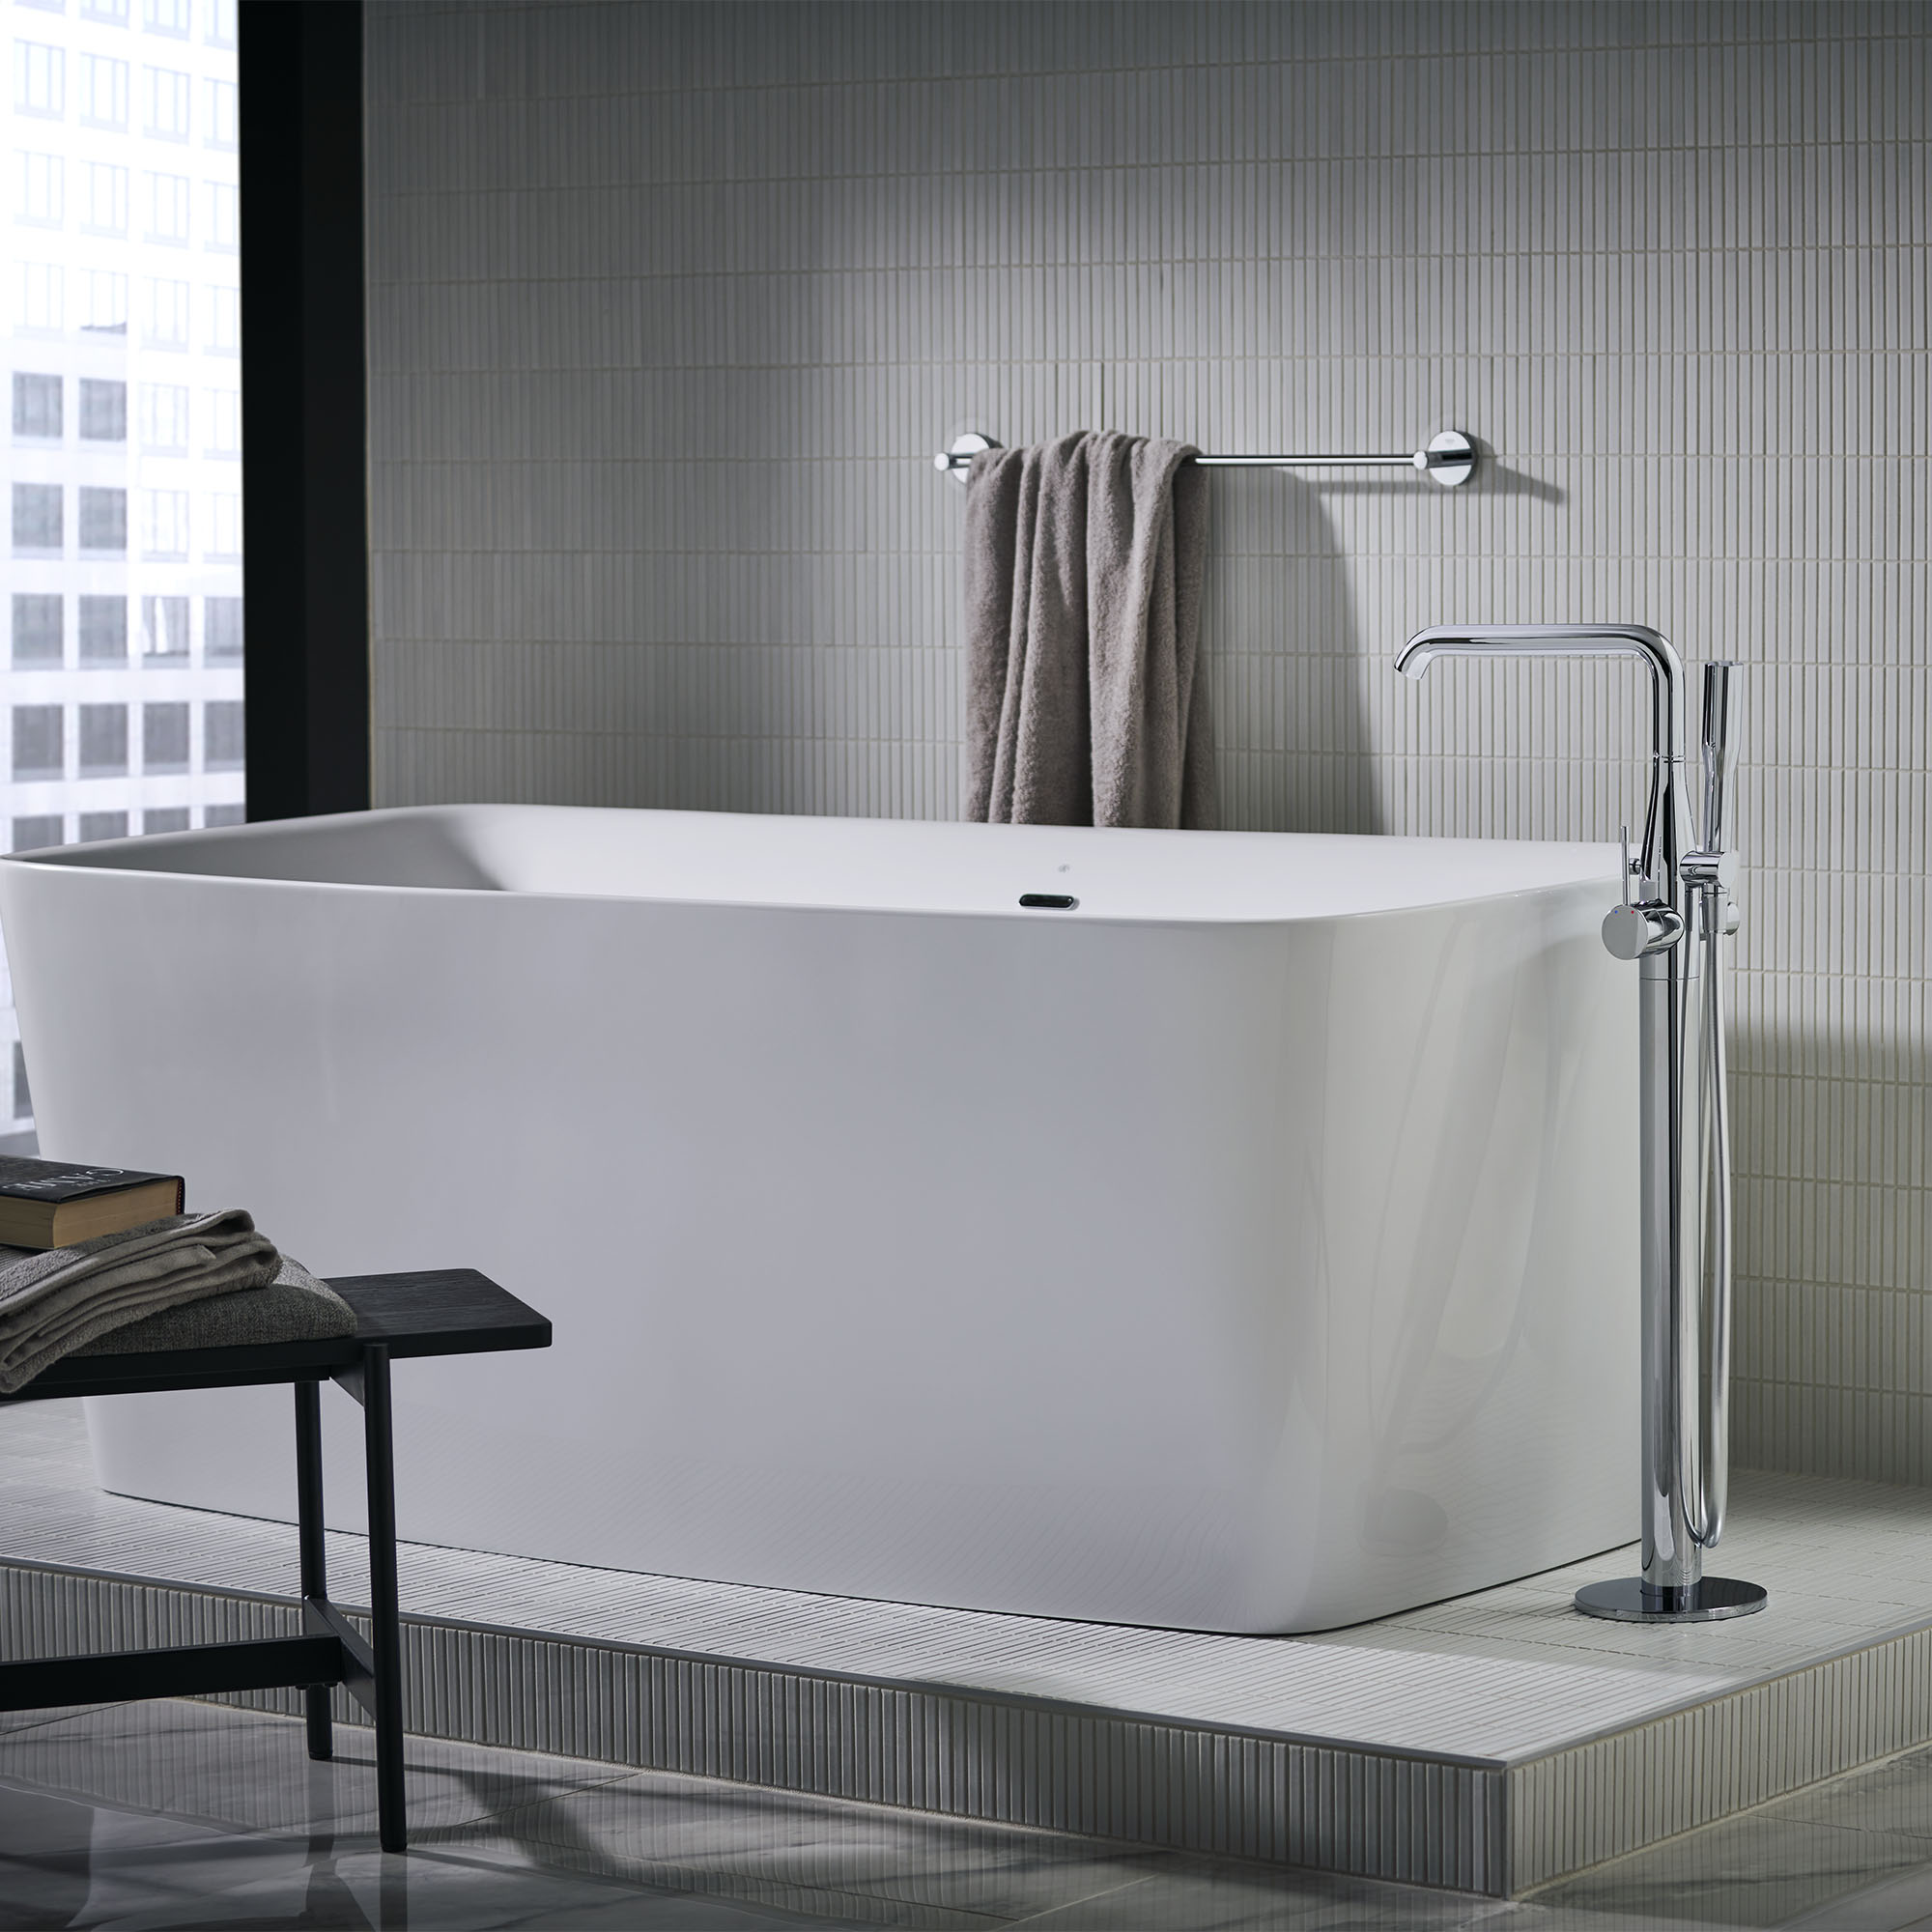 Equility 67 x 33 in. Freestanding Bathtub